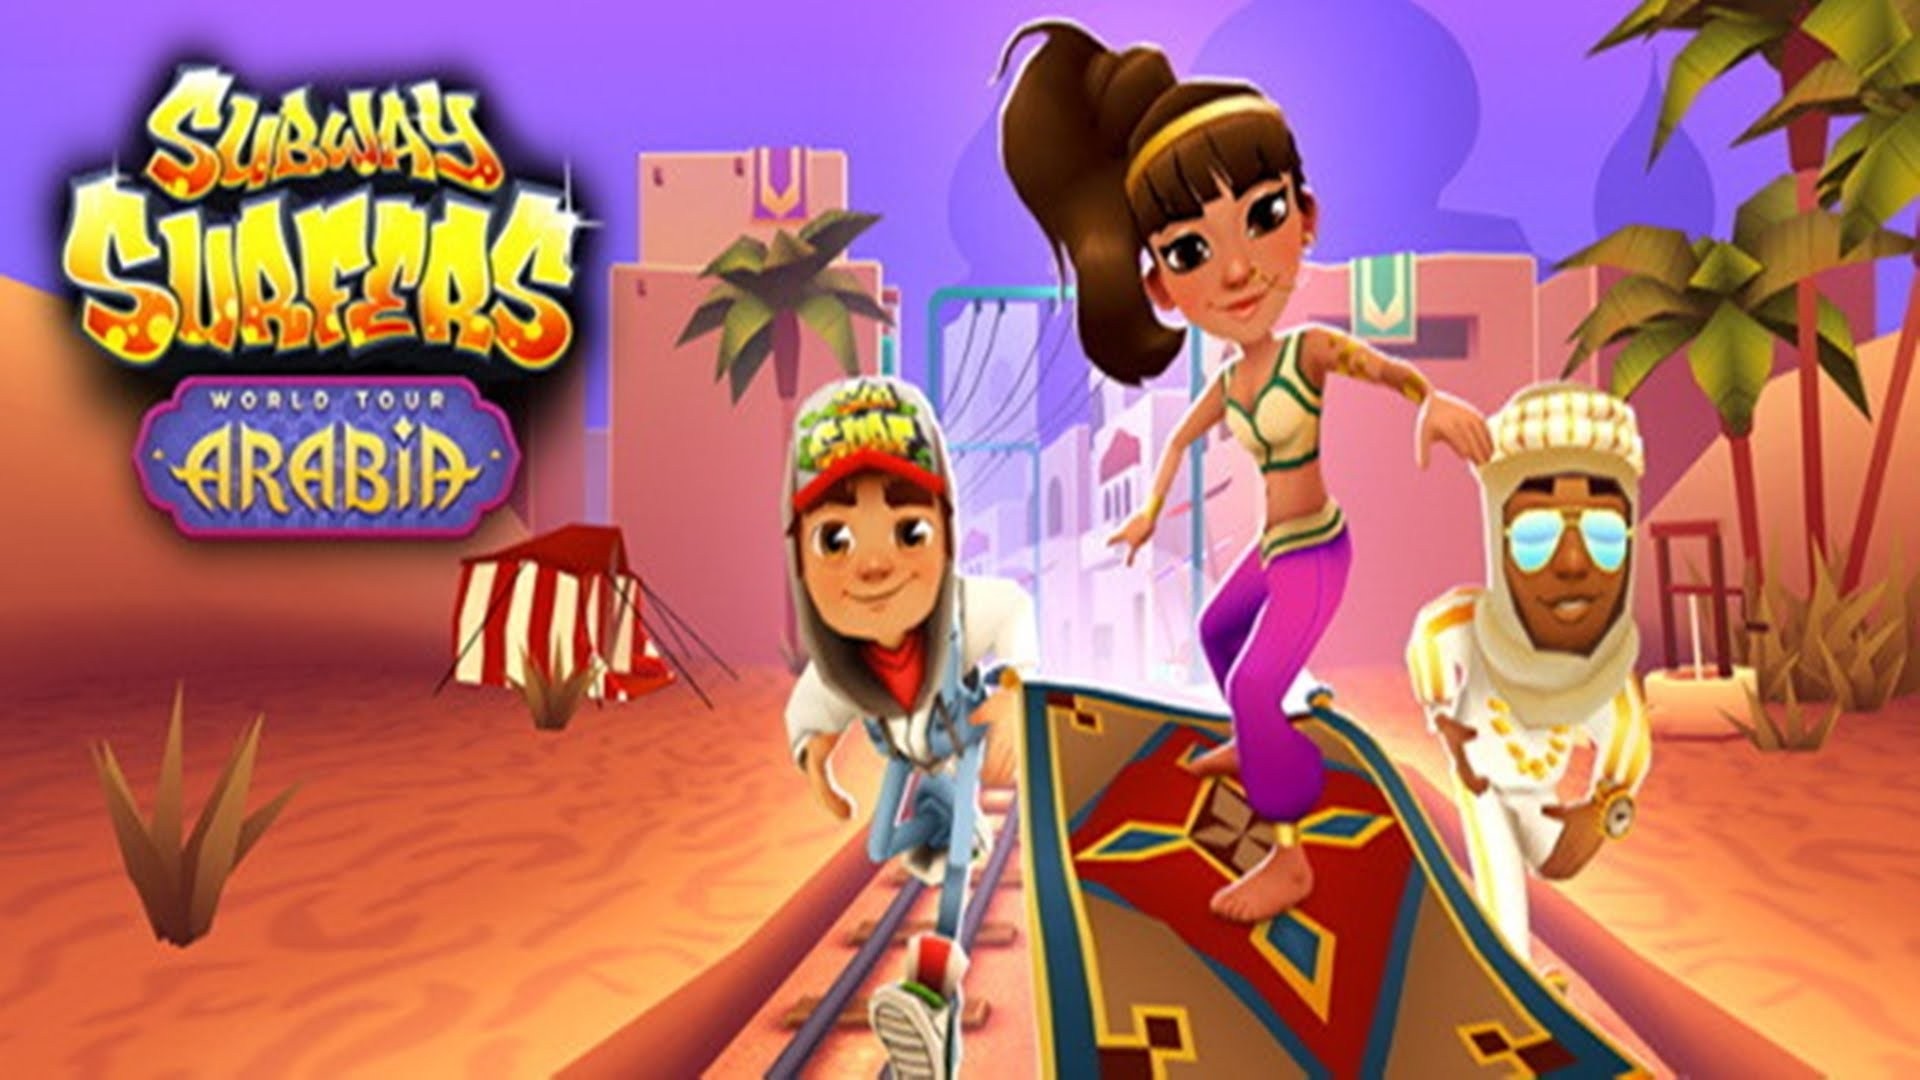 1920x1080 Power ups and challenges in Subway Surfers Arabia